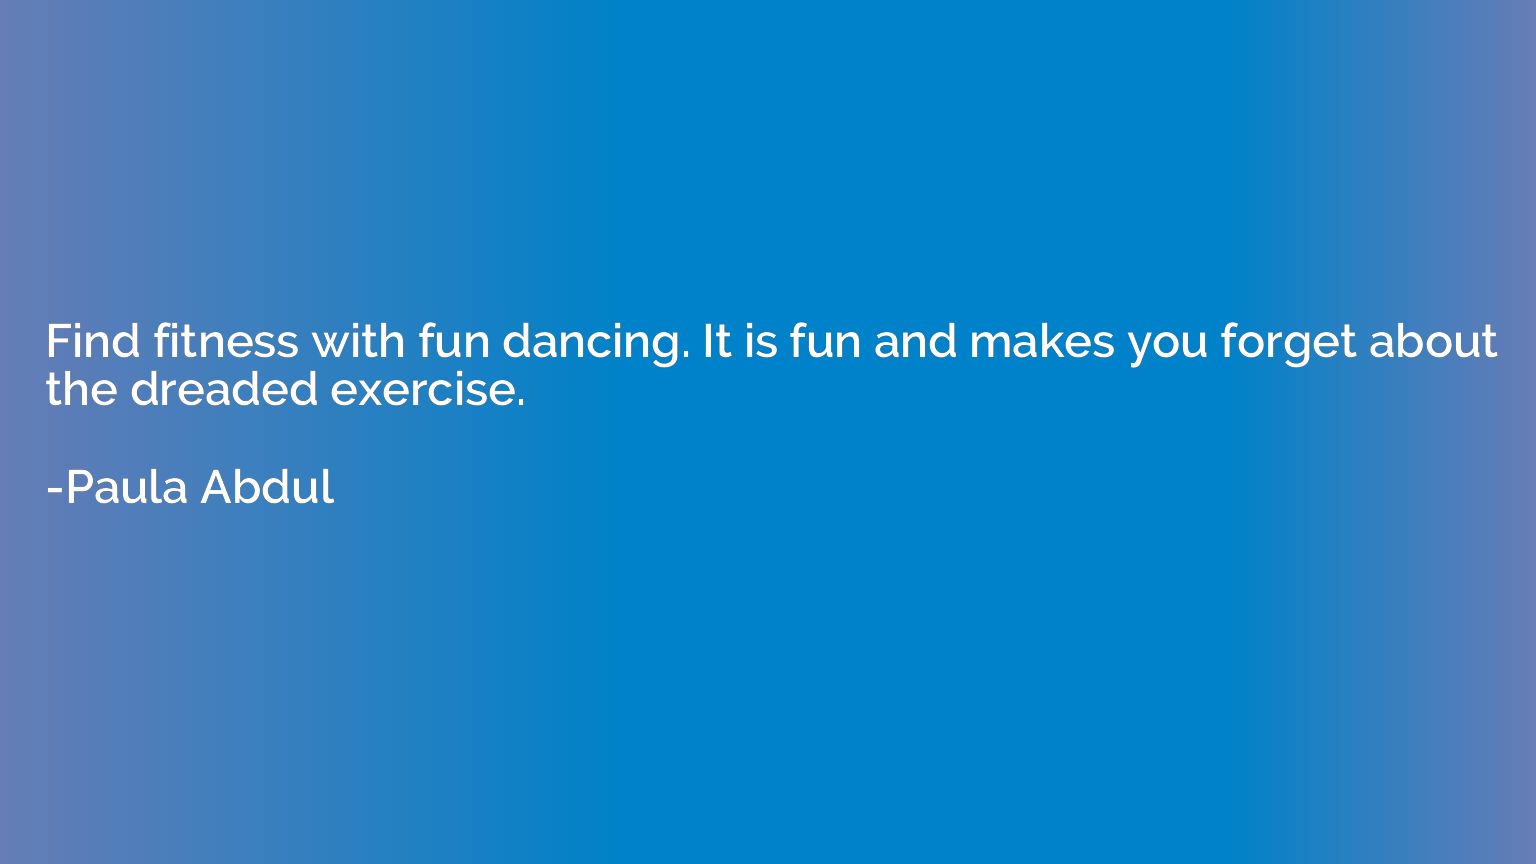 Find fitness with fun dancing. It is fun and makes you forge